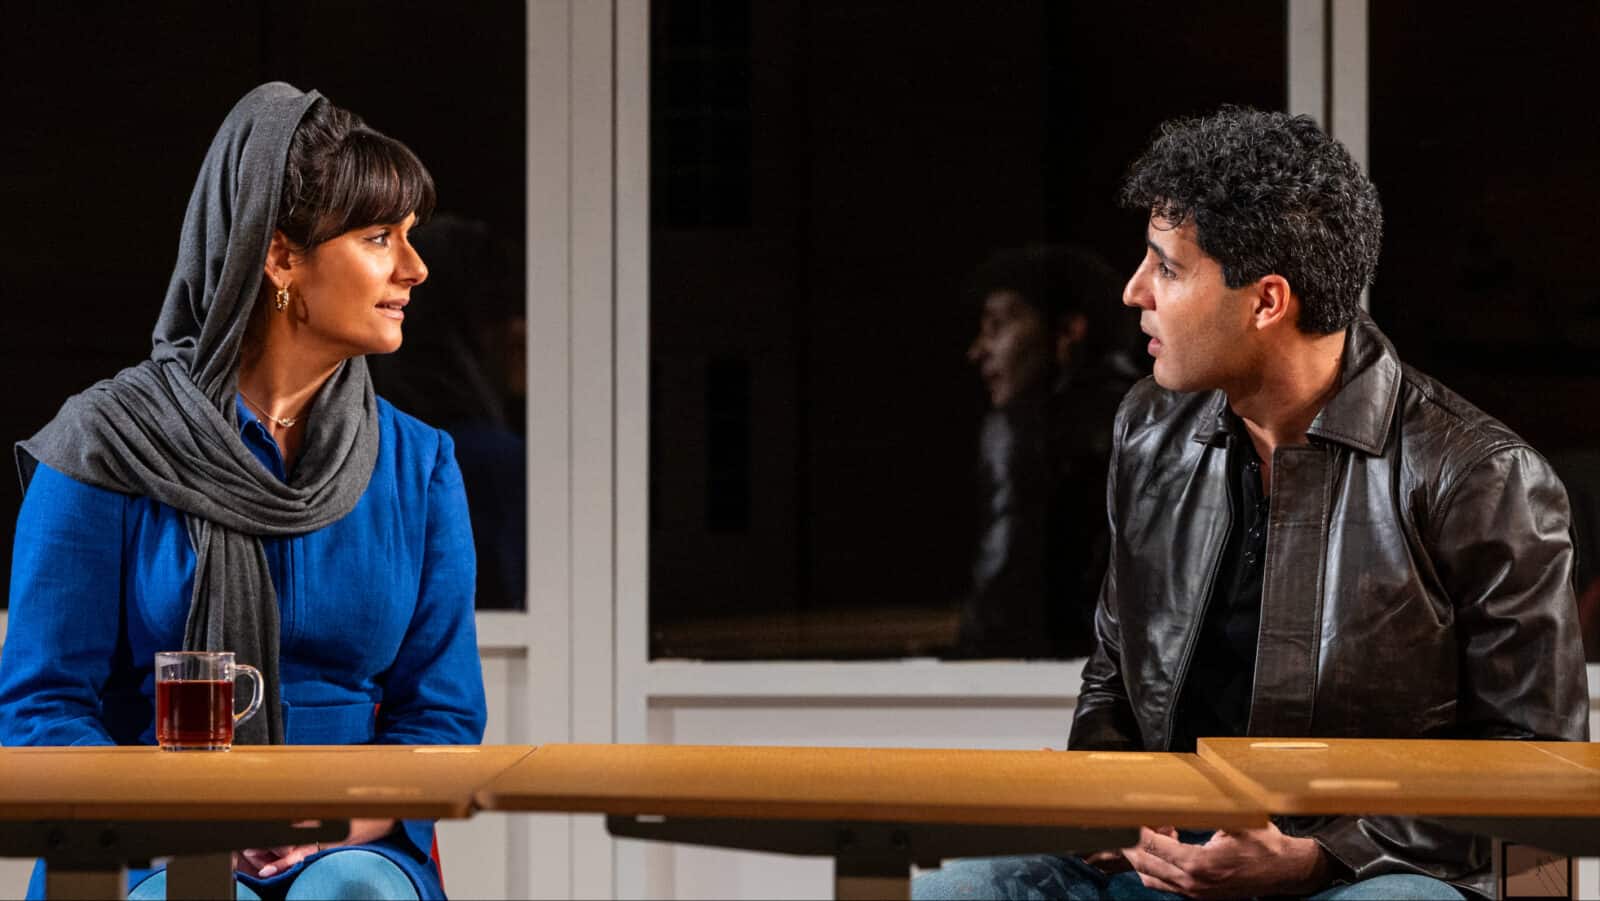 Nazanin Nour as the teacher, Marjan, talks with Babak Tafti as Omid, a student in her office hours in a city classroom at night, in Sanaz Toossi's play 'English' at Barrington stage. Press photo courtesy of BSC